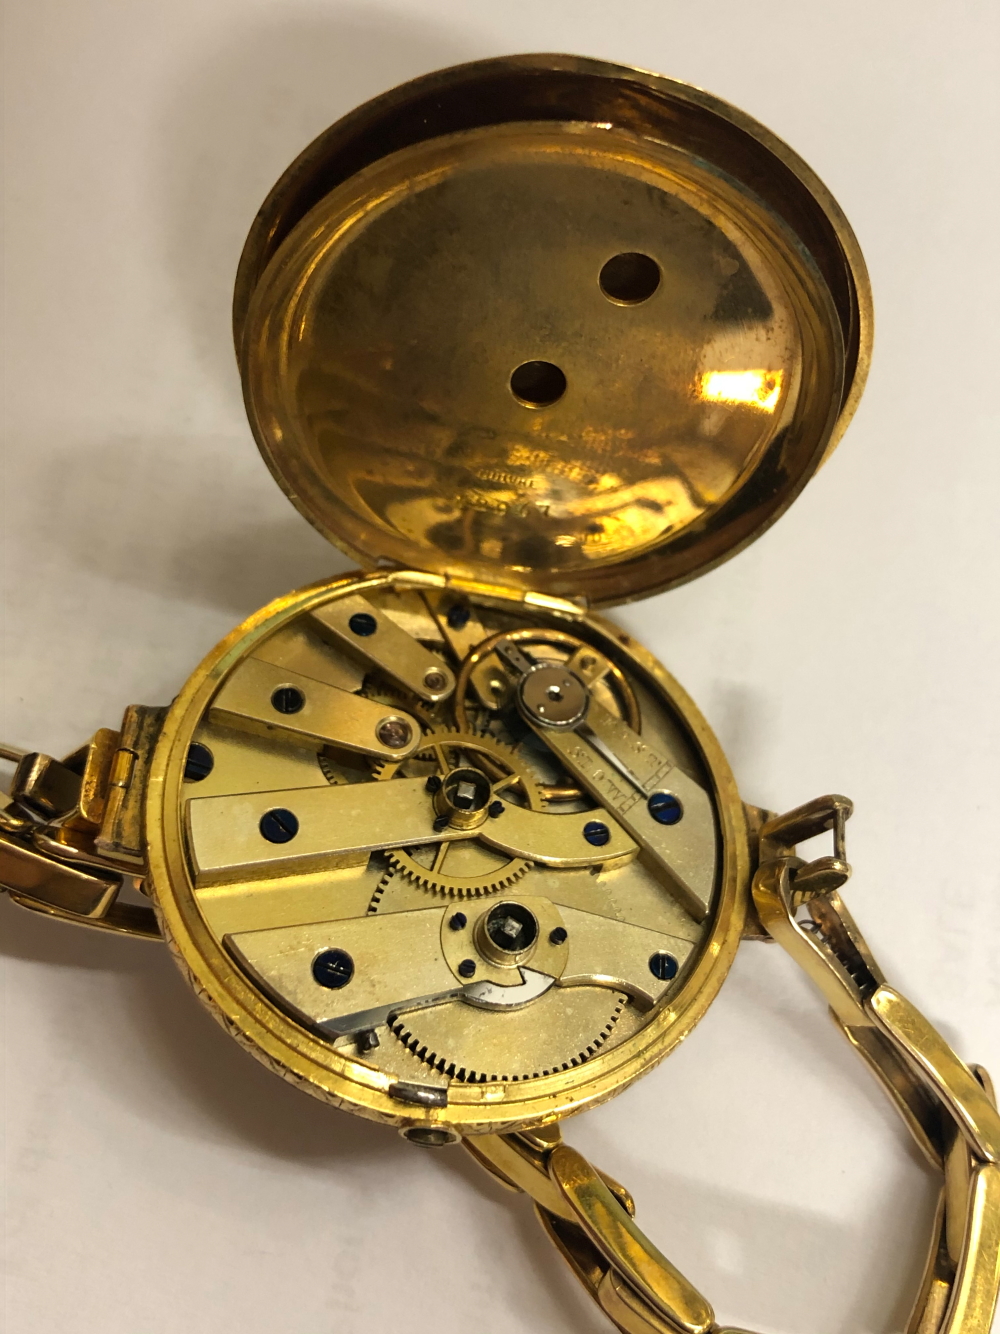 AN 18ct GOLD SWISS FOB WATCH REMODELLED AS A WRIST WATCH, CASE MARKED WITH SWISS HELVETIA - Image 7 of 11